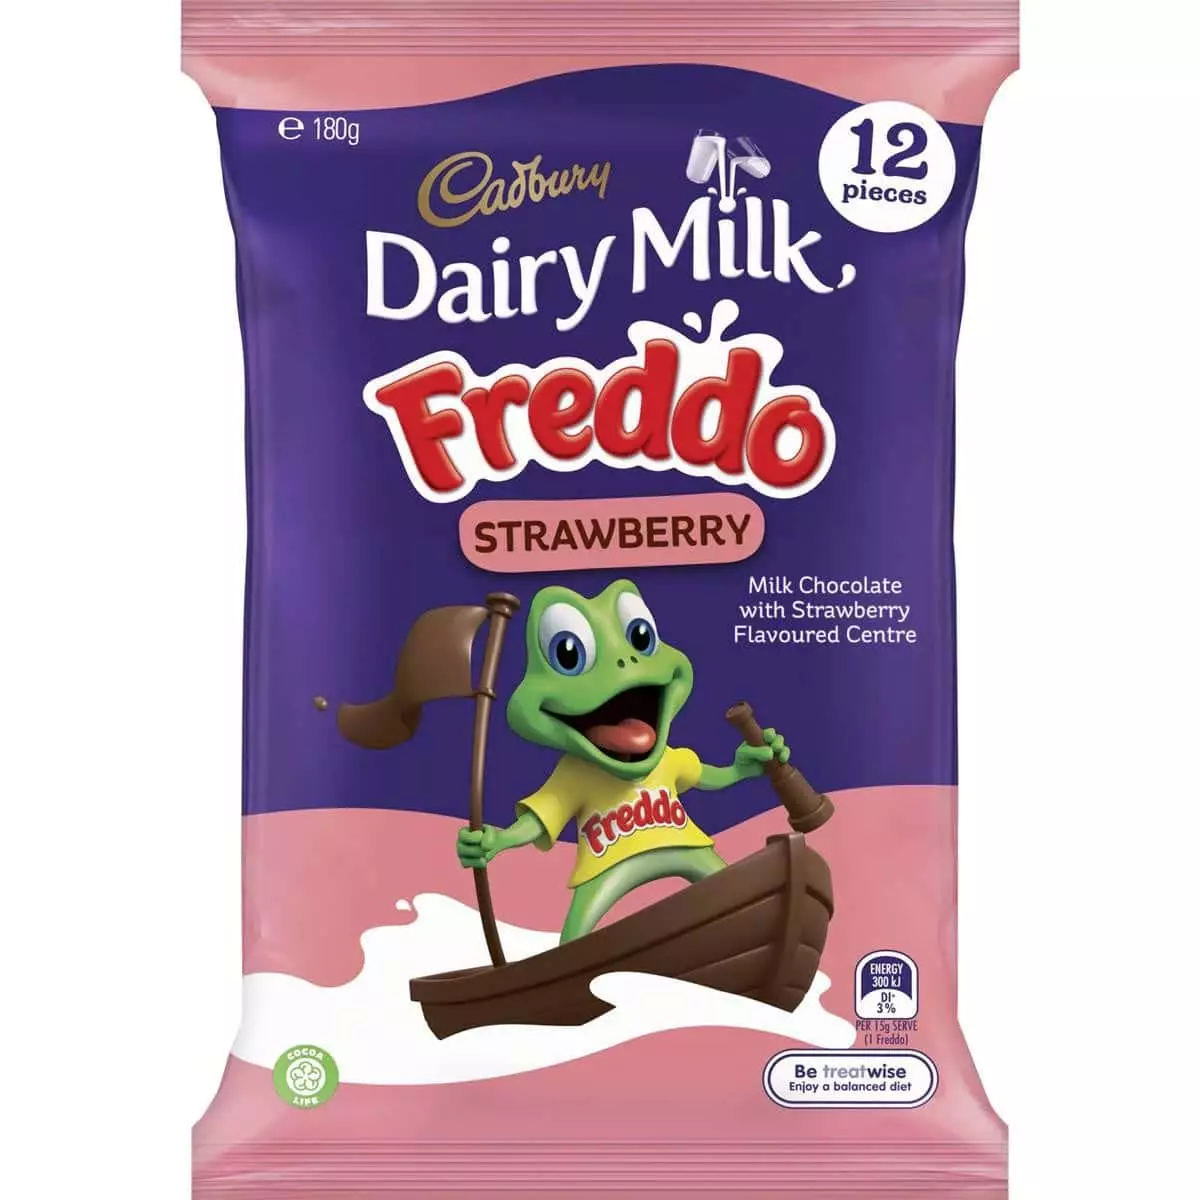 Grab Strawberry Freddos in the UK, now (